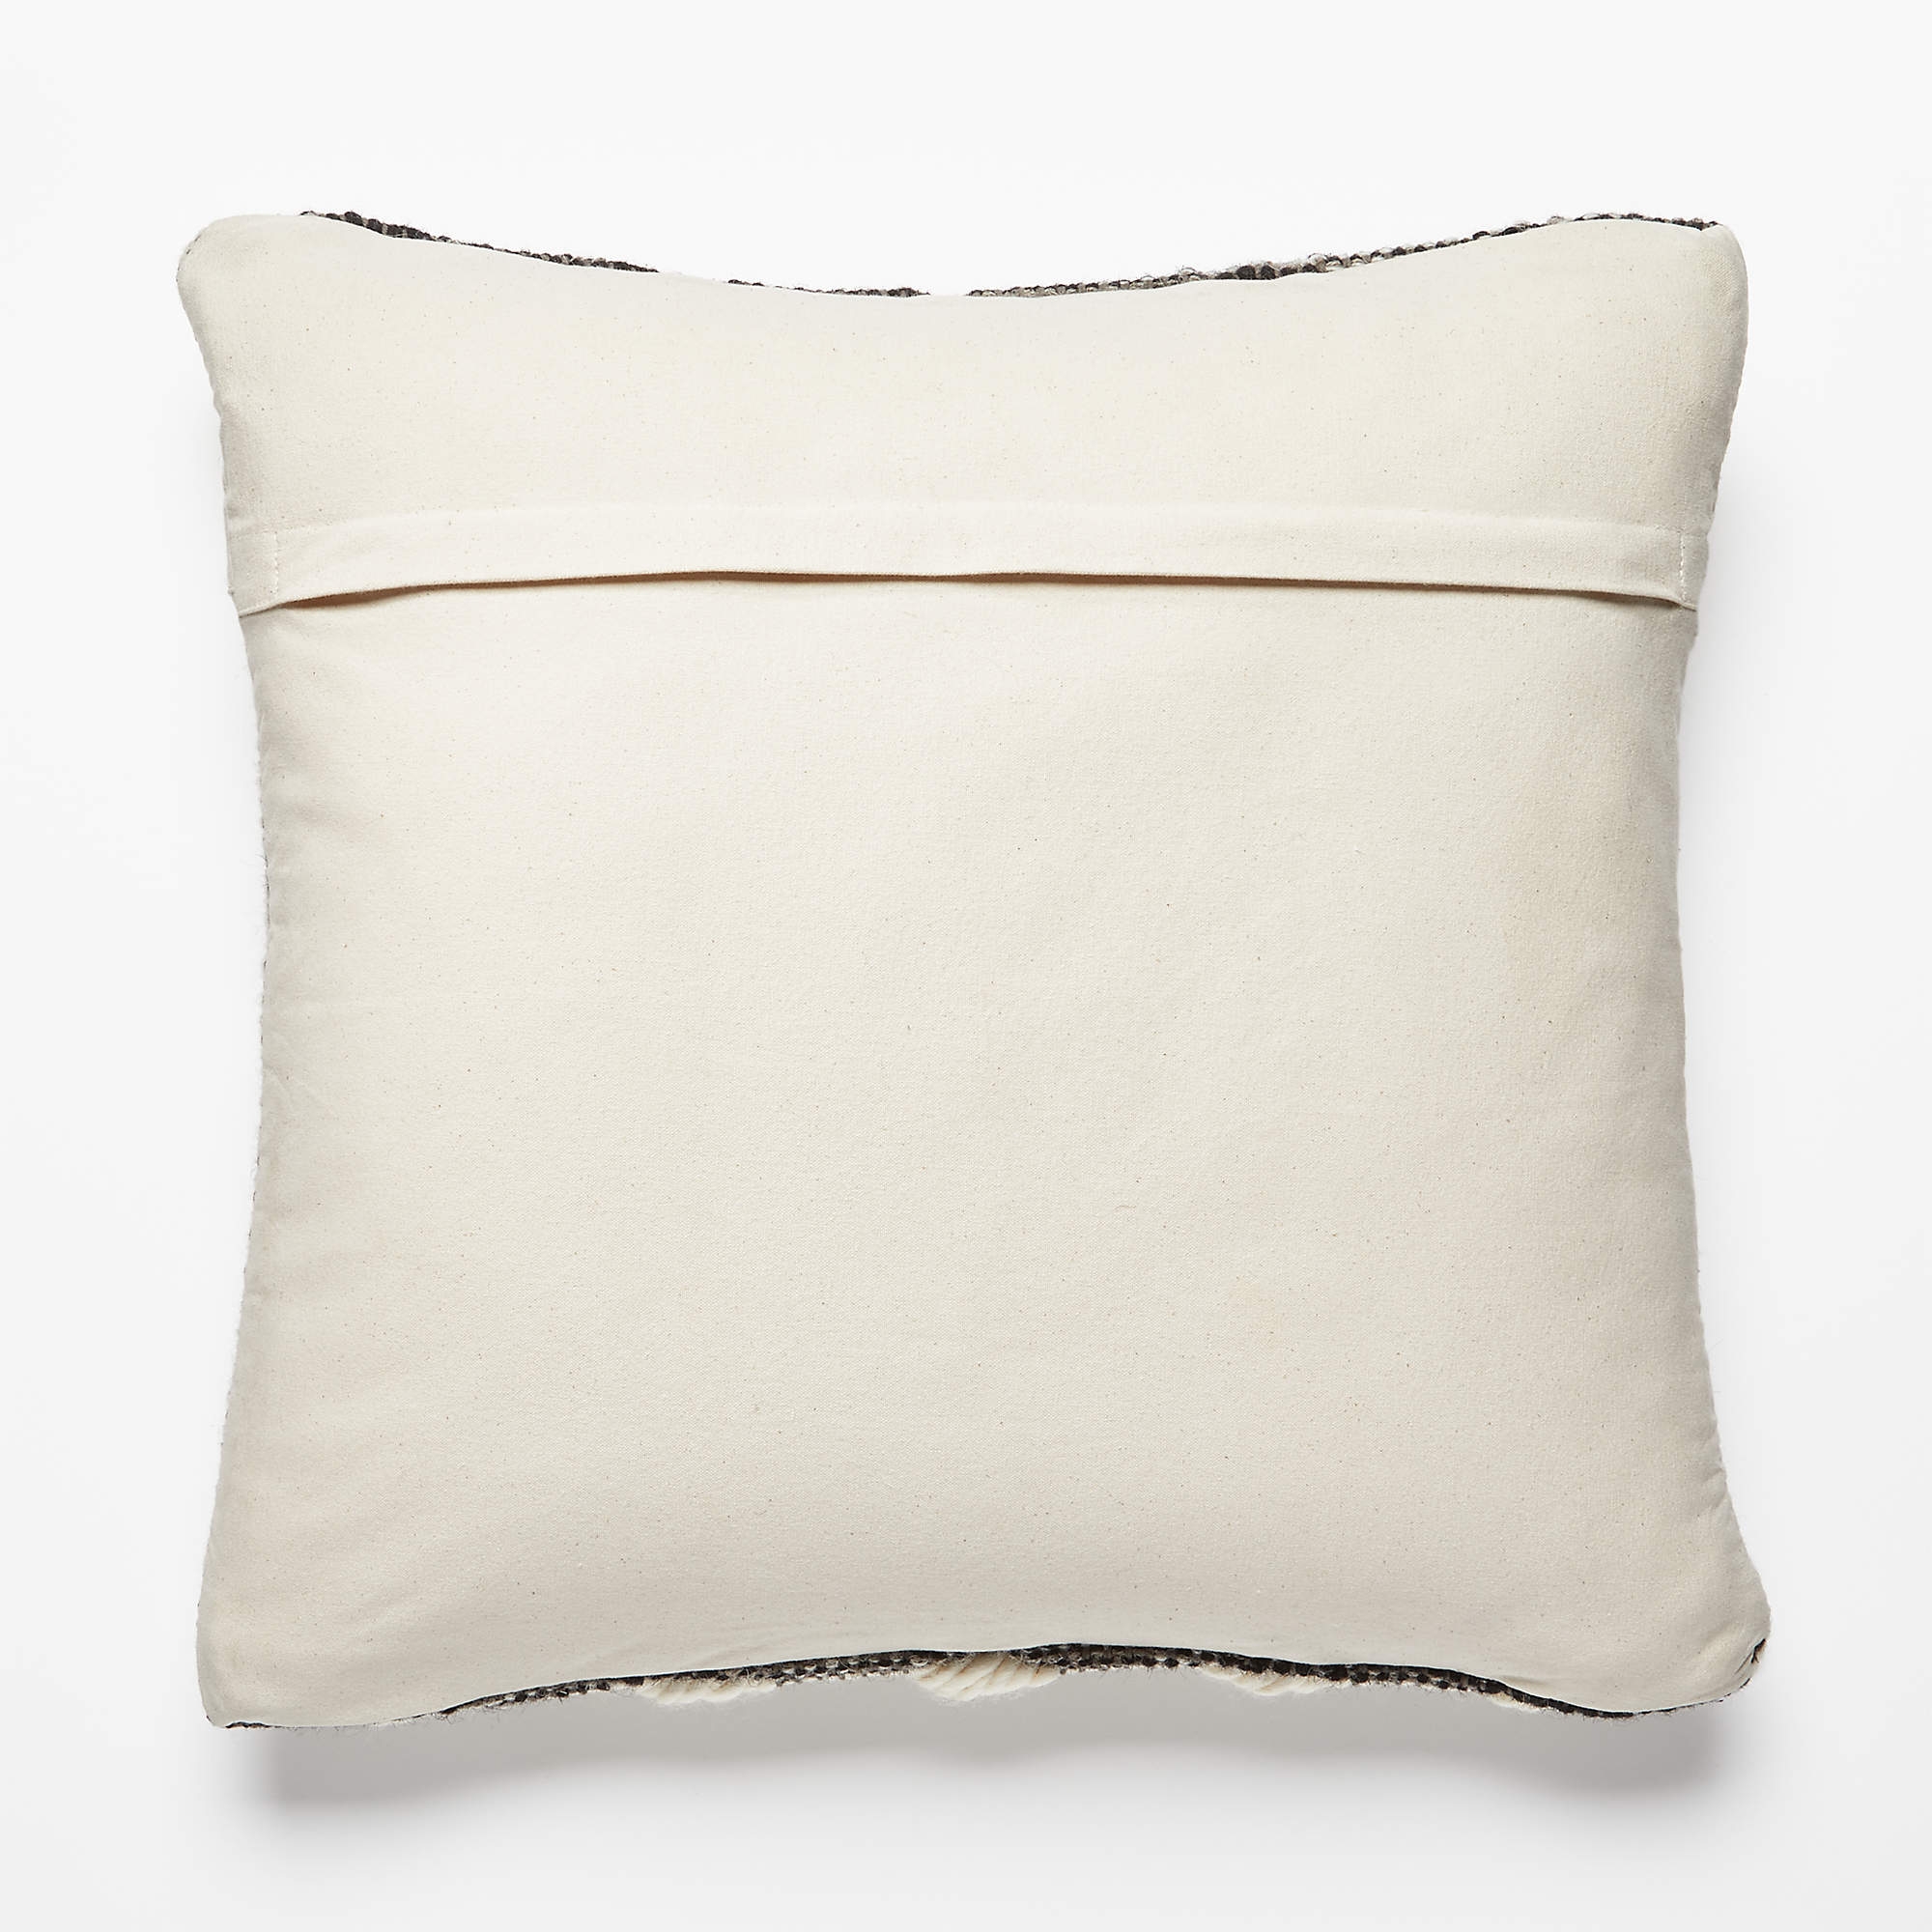 Simon Ivory White Wool Throw Pillow with Feather-Down Insert 20" - Image 2